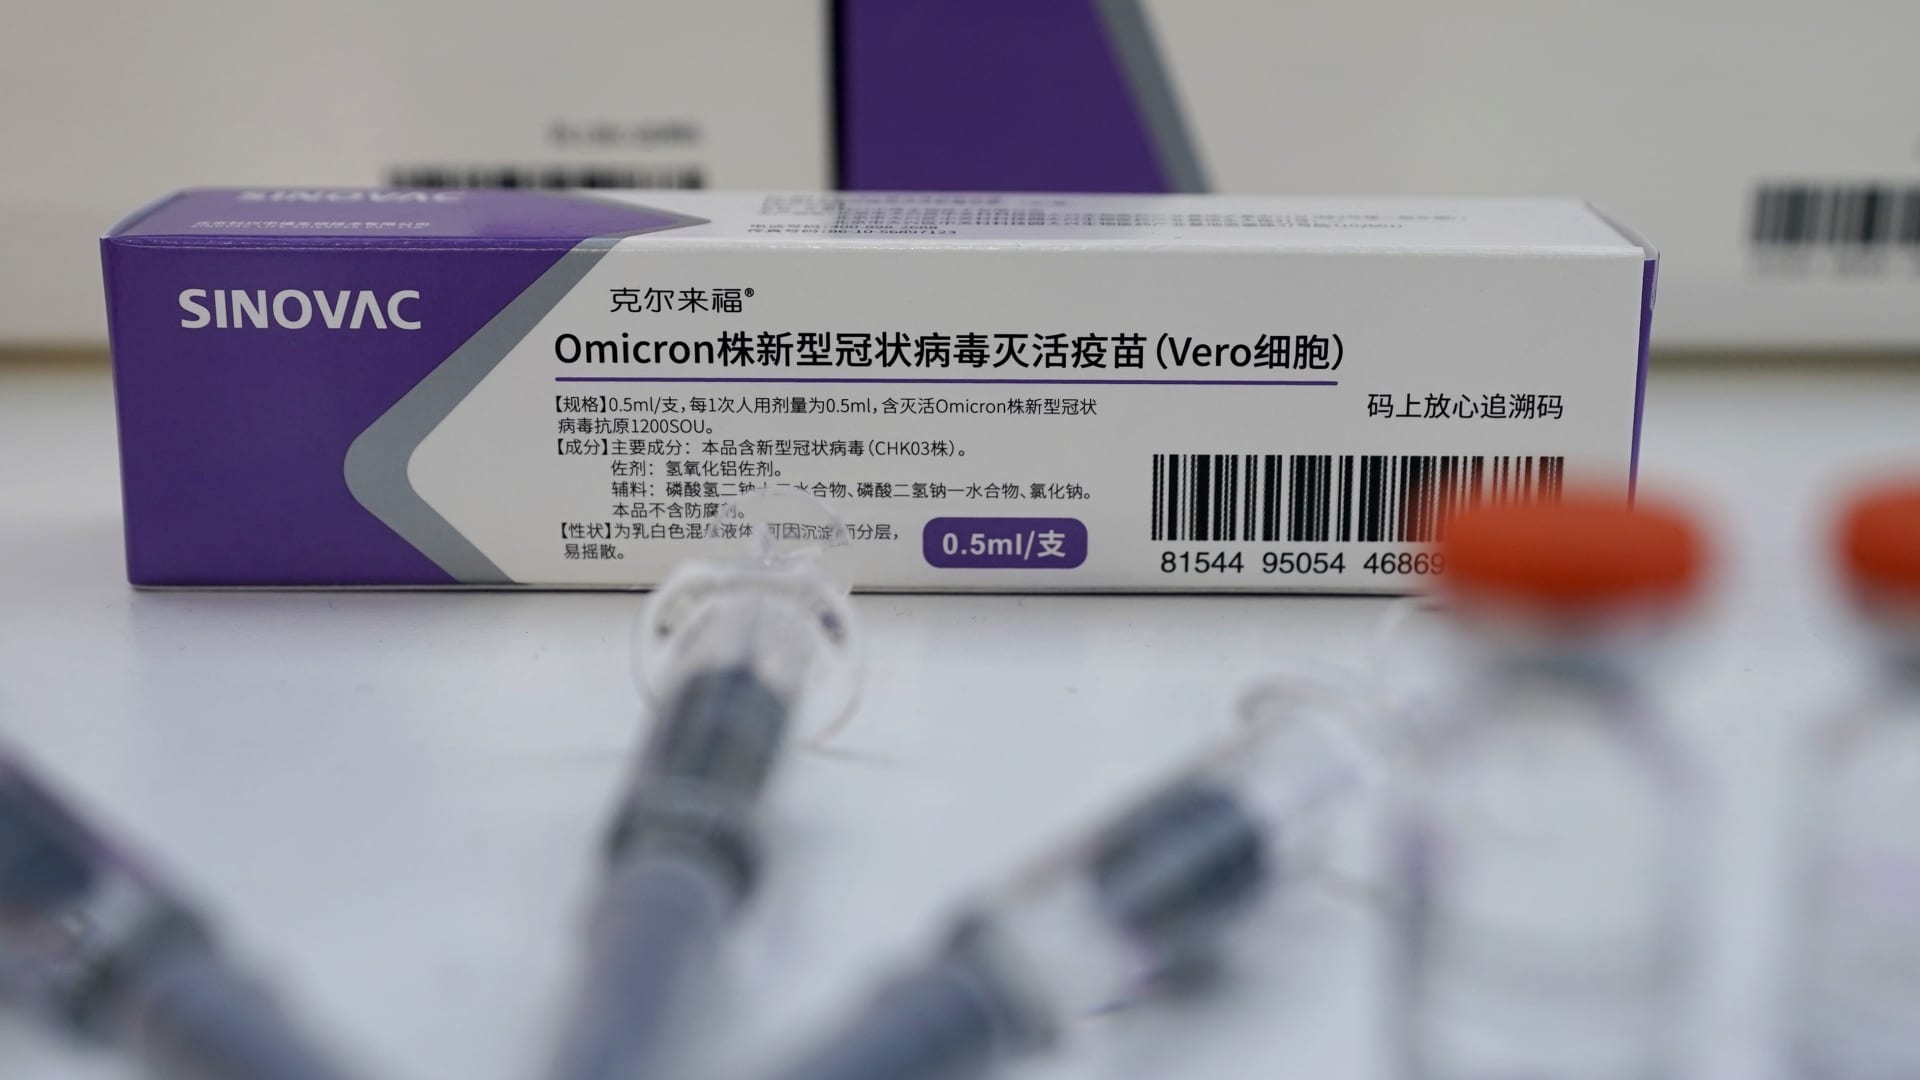 China should set aside political issues on vaccine imports, CEO says